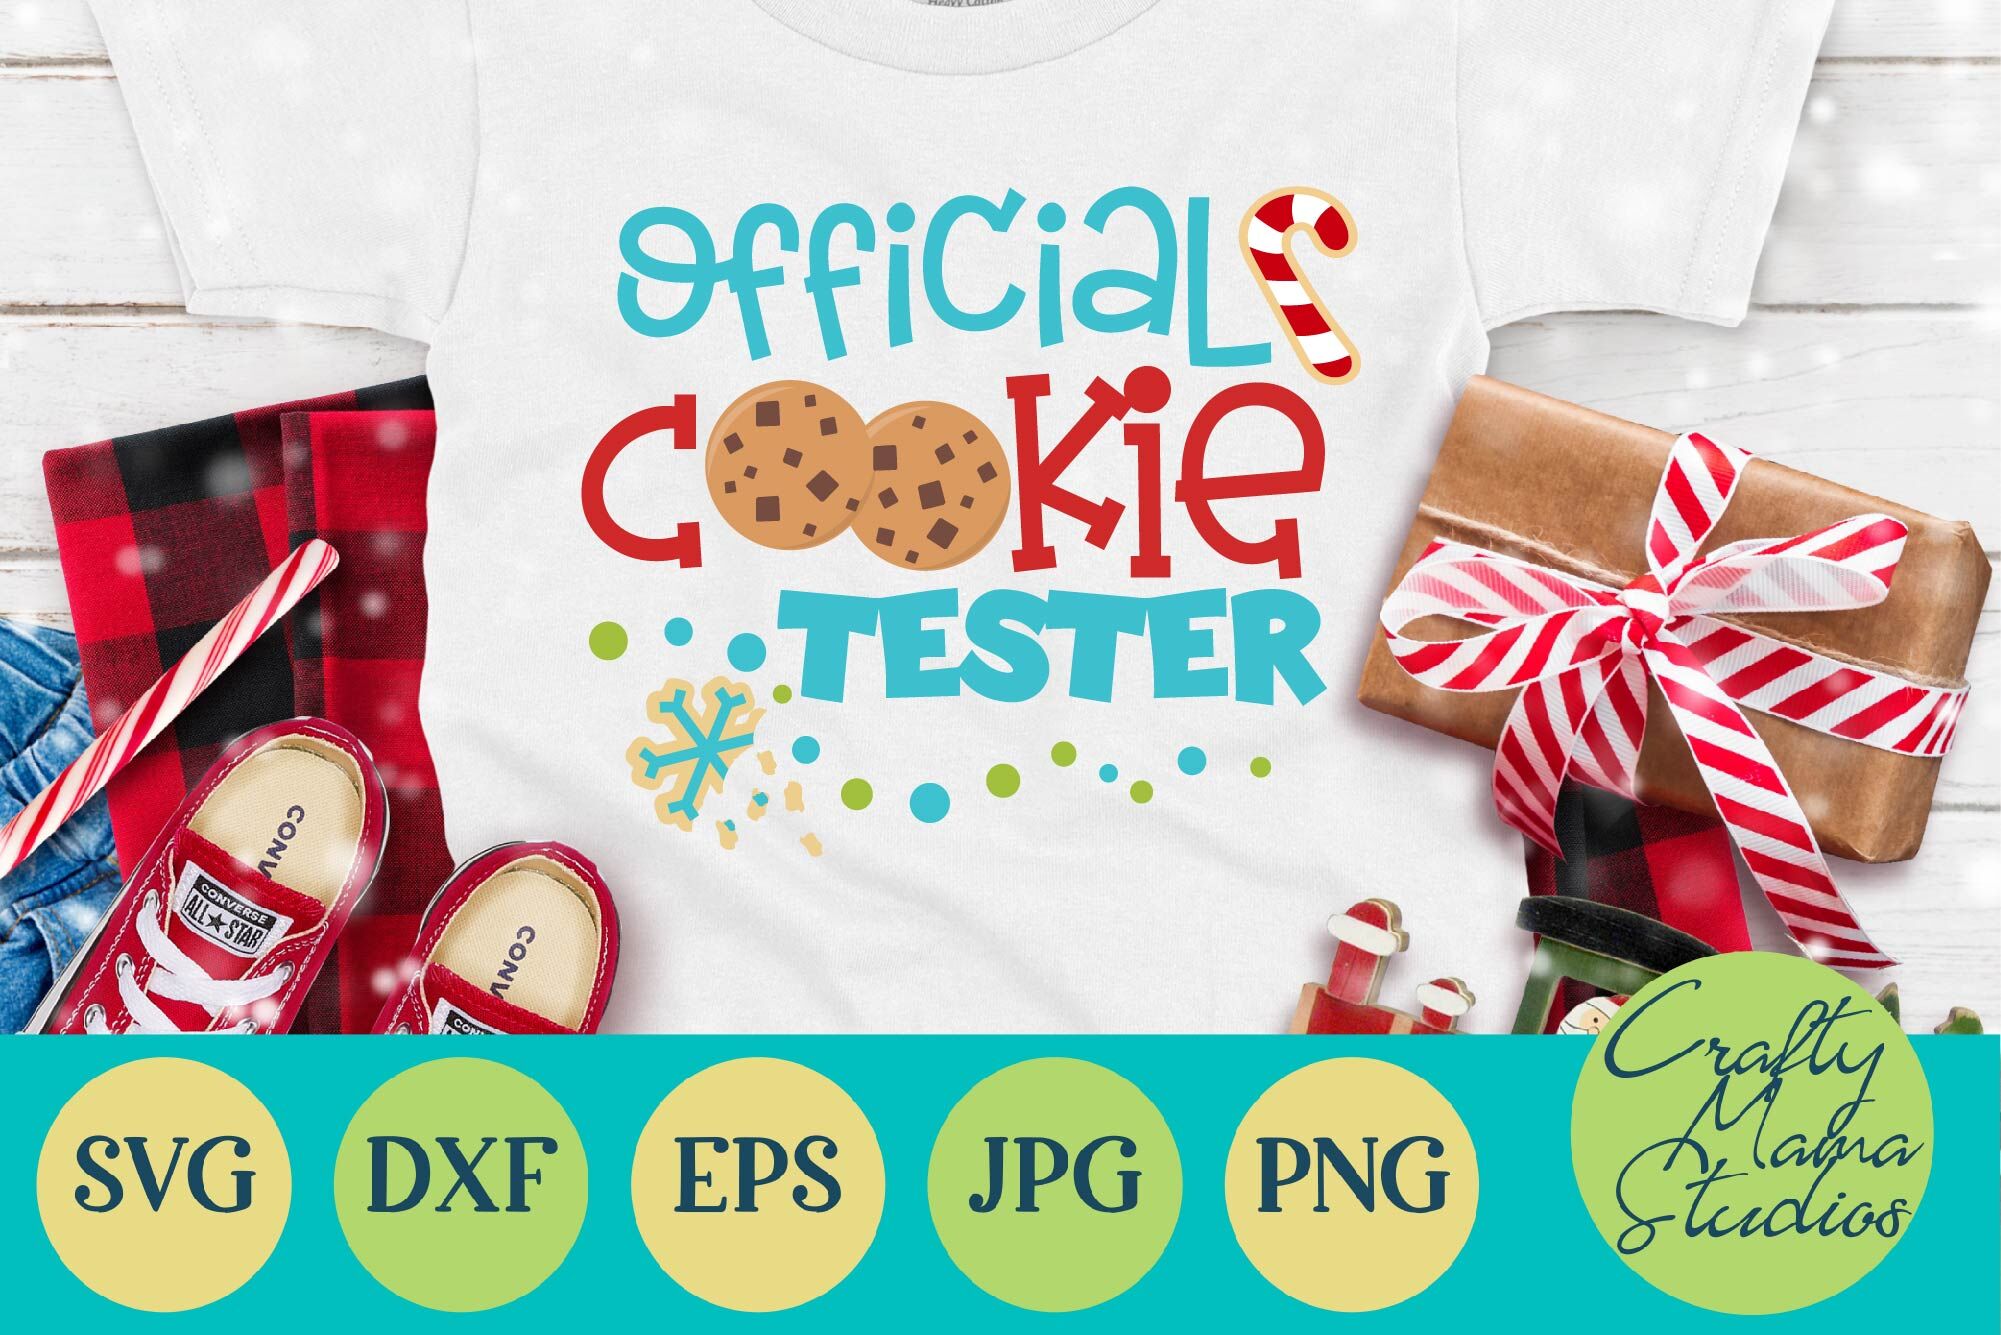 Christmas Svg Official Cookie Tester Christmas Cookies By Crafty Mama Studios Thehungryjpeg Com